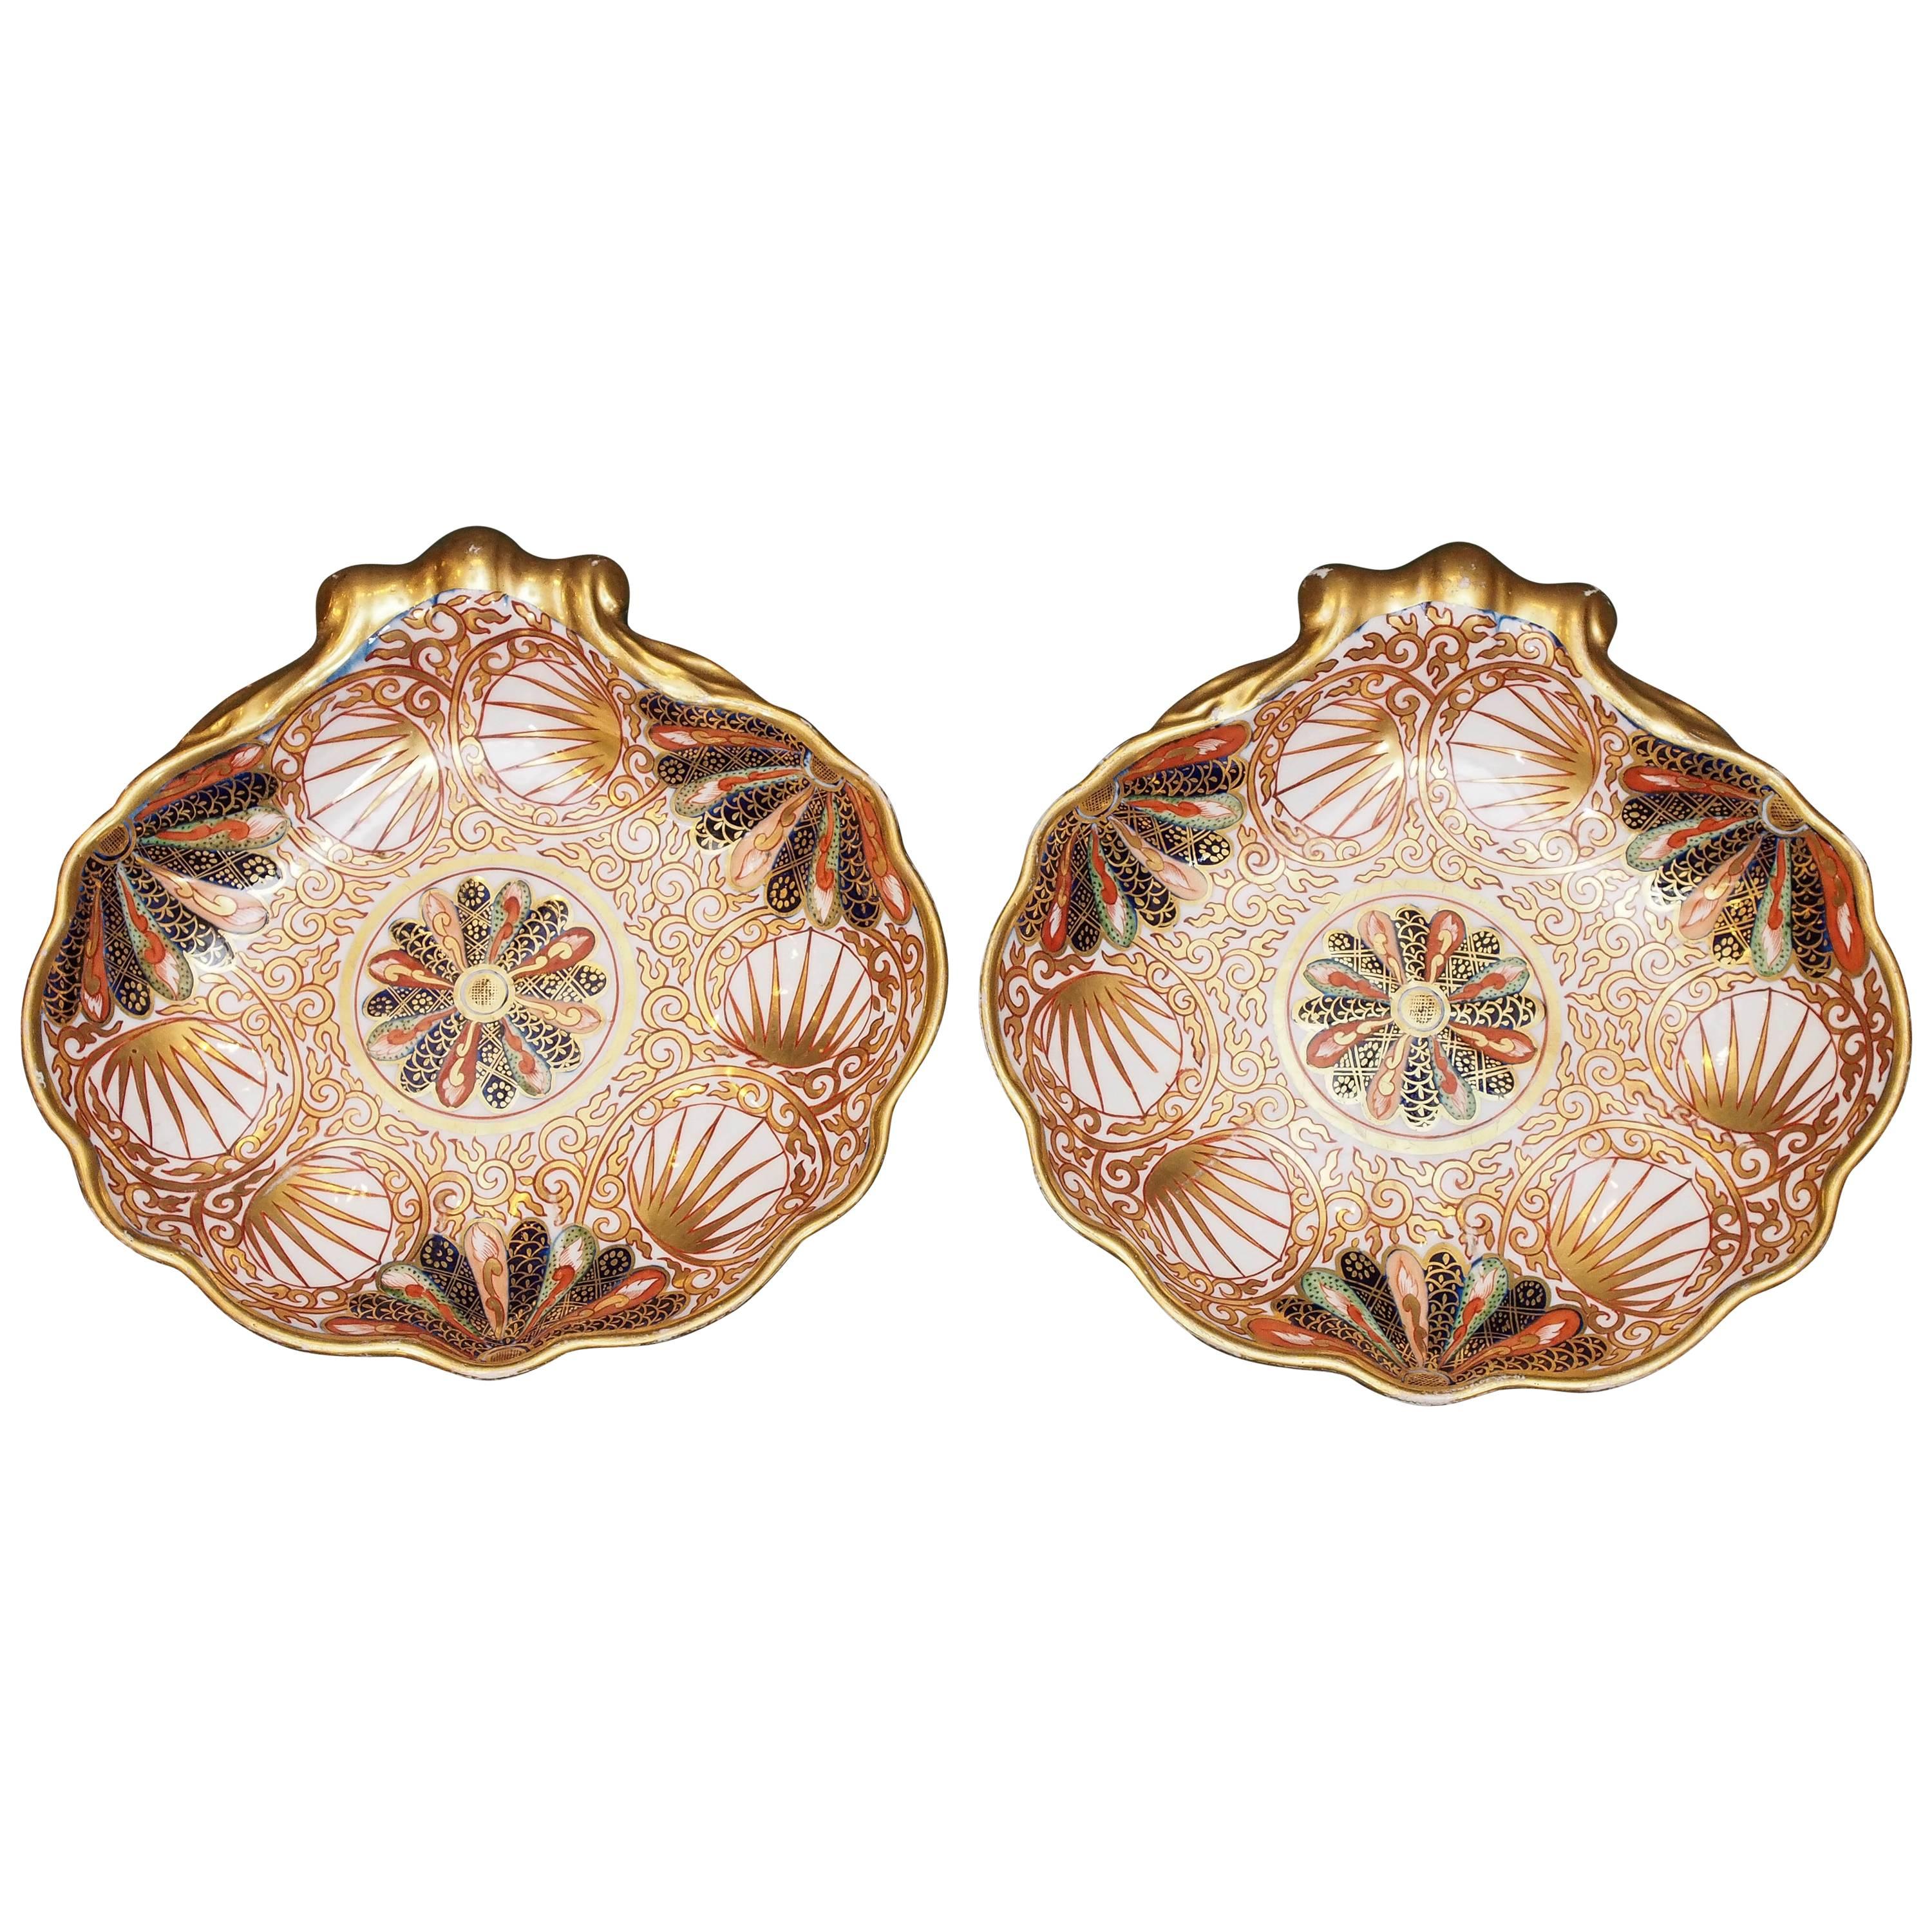 Pair of 19th Century Spode Shell Form Sweetmeat Dishes